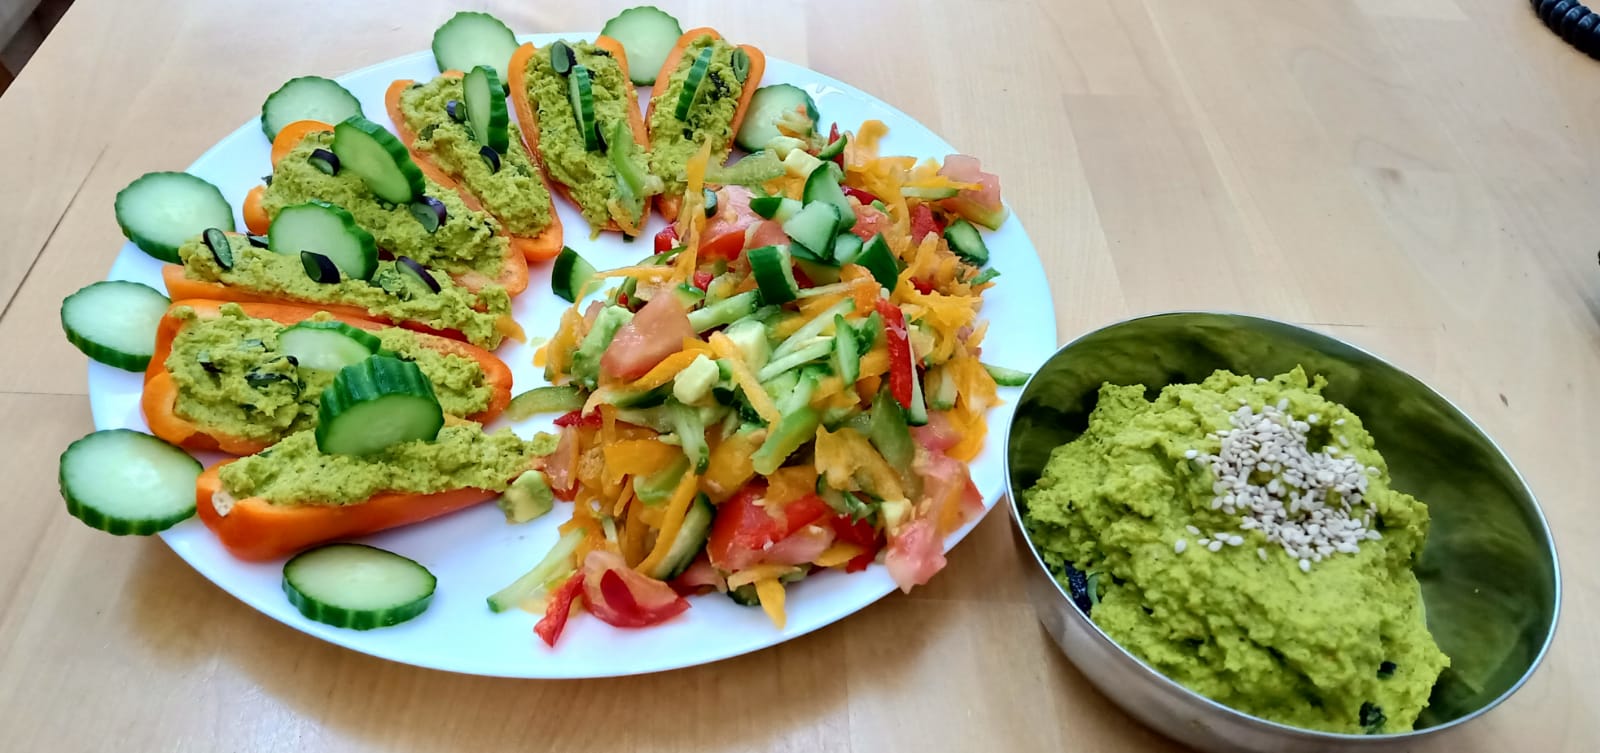 Vegetable Salad with Stuffed Peppers and Chutney